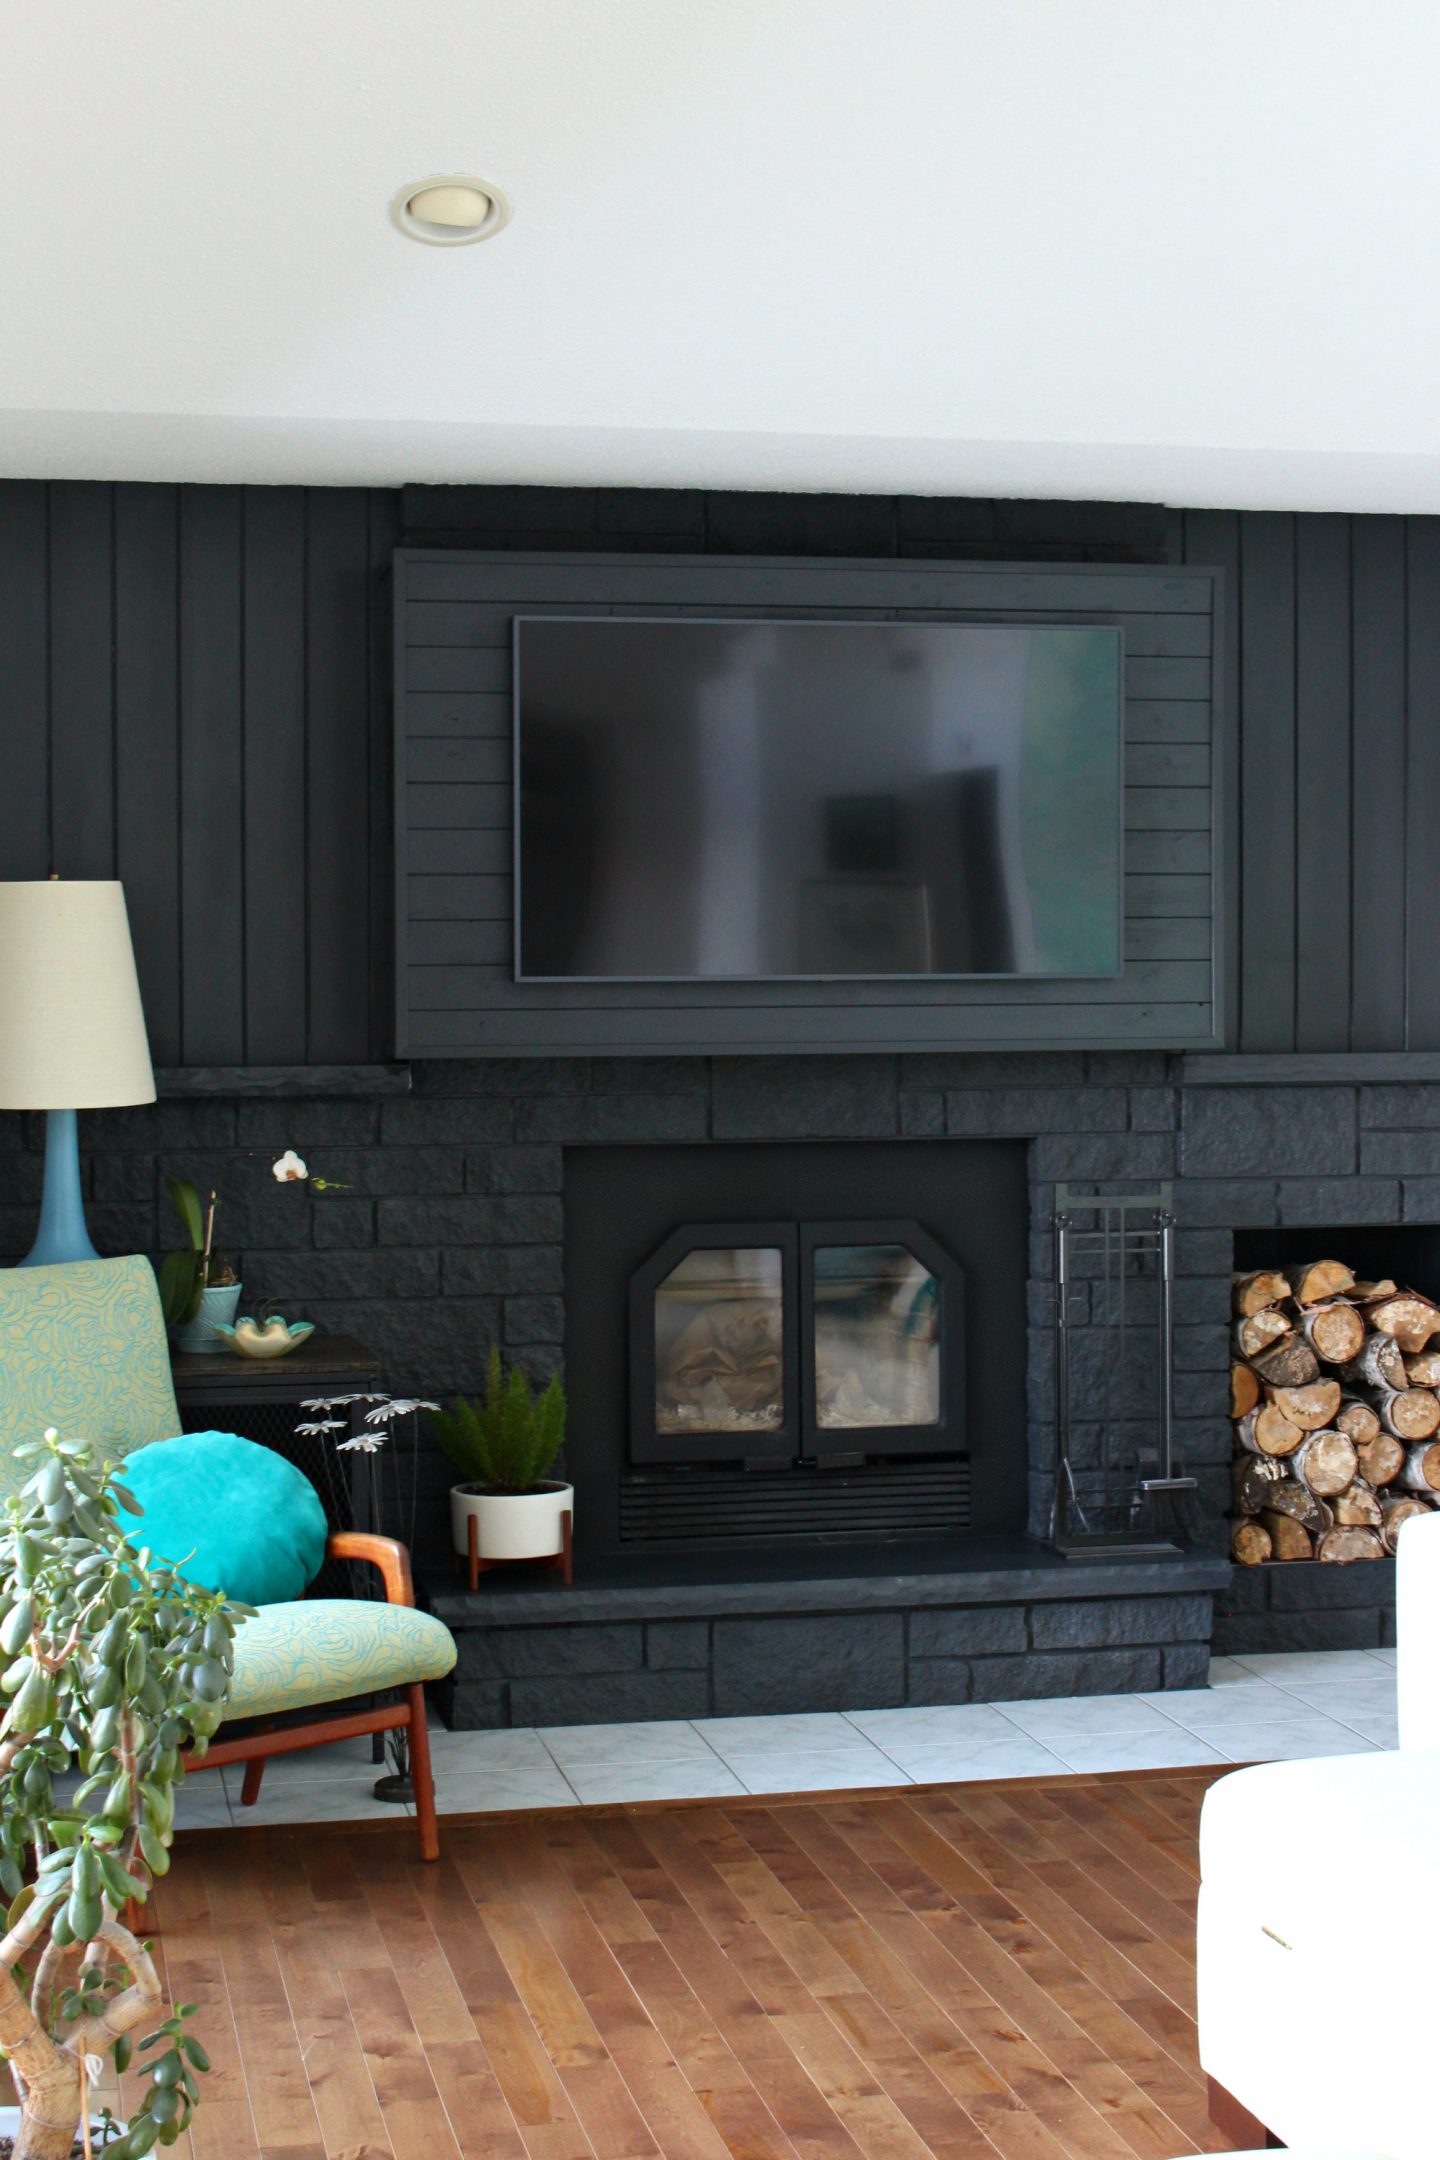 How to Build a Fireplace Bump Out to Hang a TV | How to Hang a TV over Fireplace When Mantle is Too High | Fireplace Hack by Dans le Lakehouse